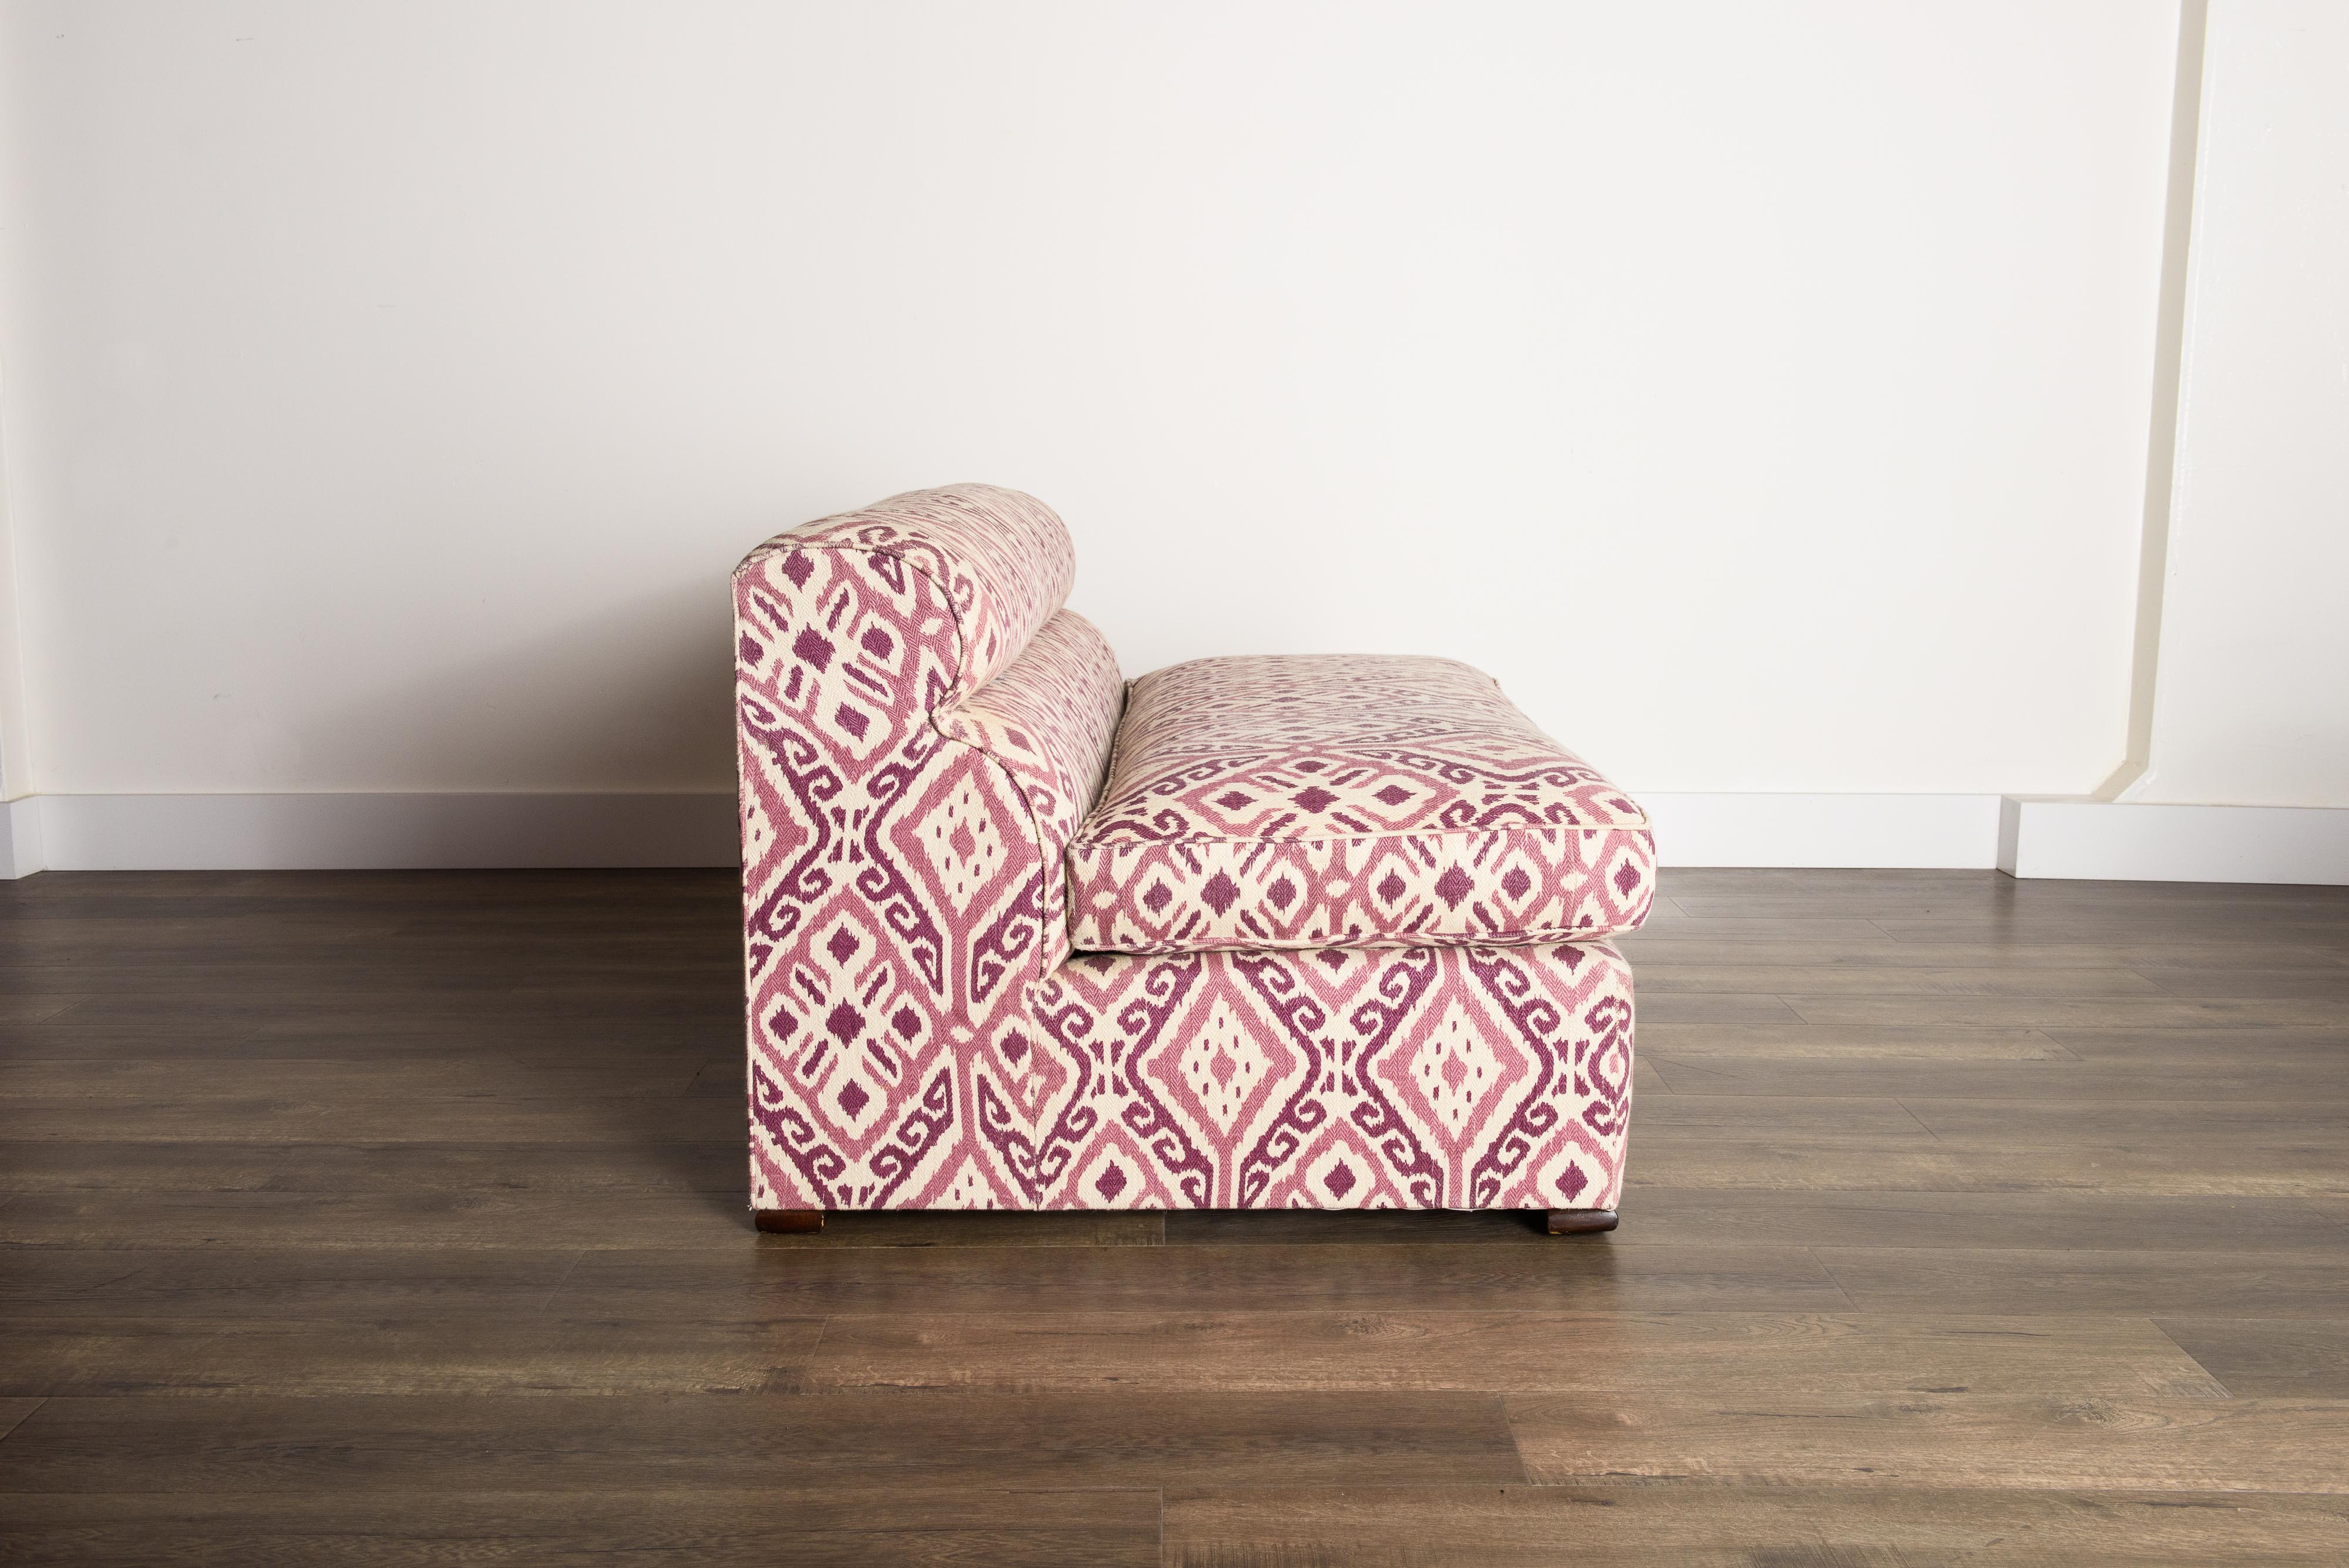 Paul Laszlo Attributed Curved Sectional Sofa Reupholstered in Pink Ikat Fabric For Sale 4